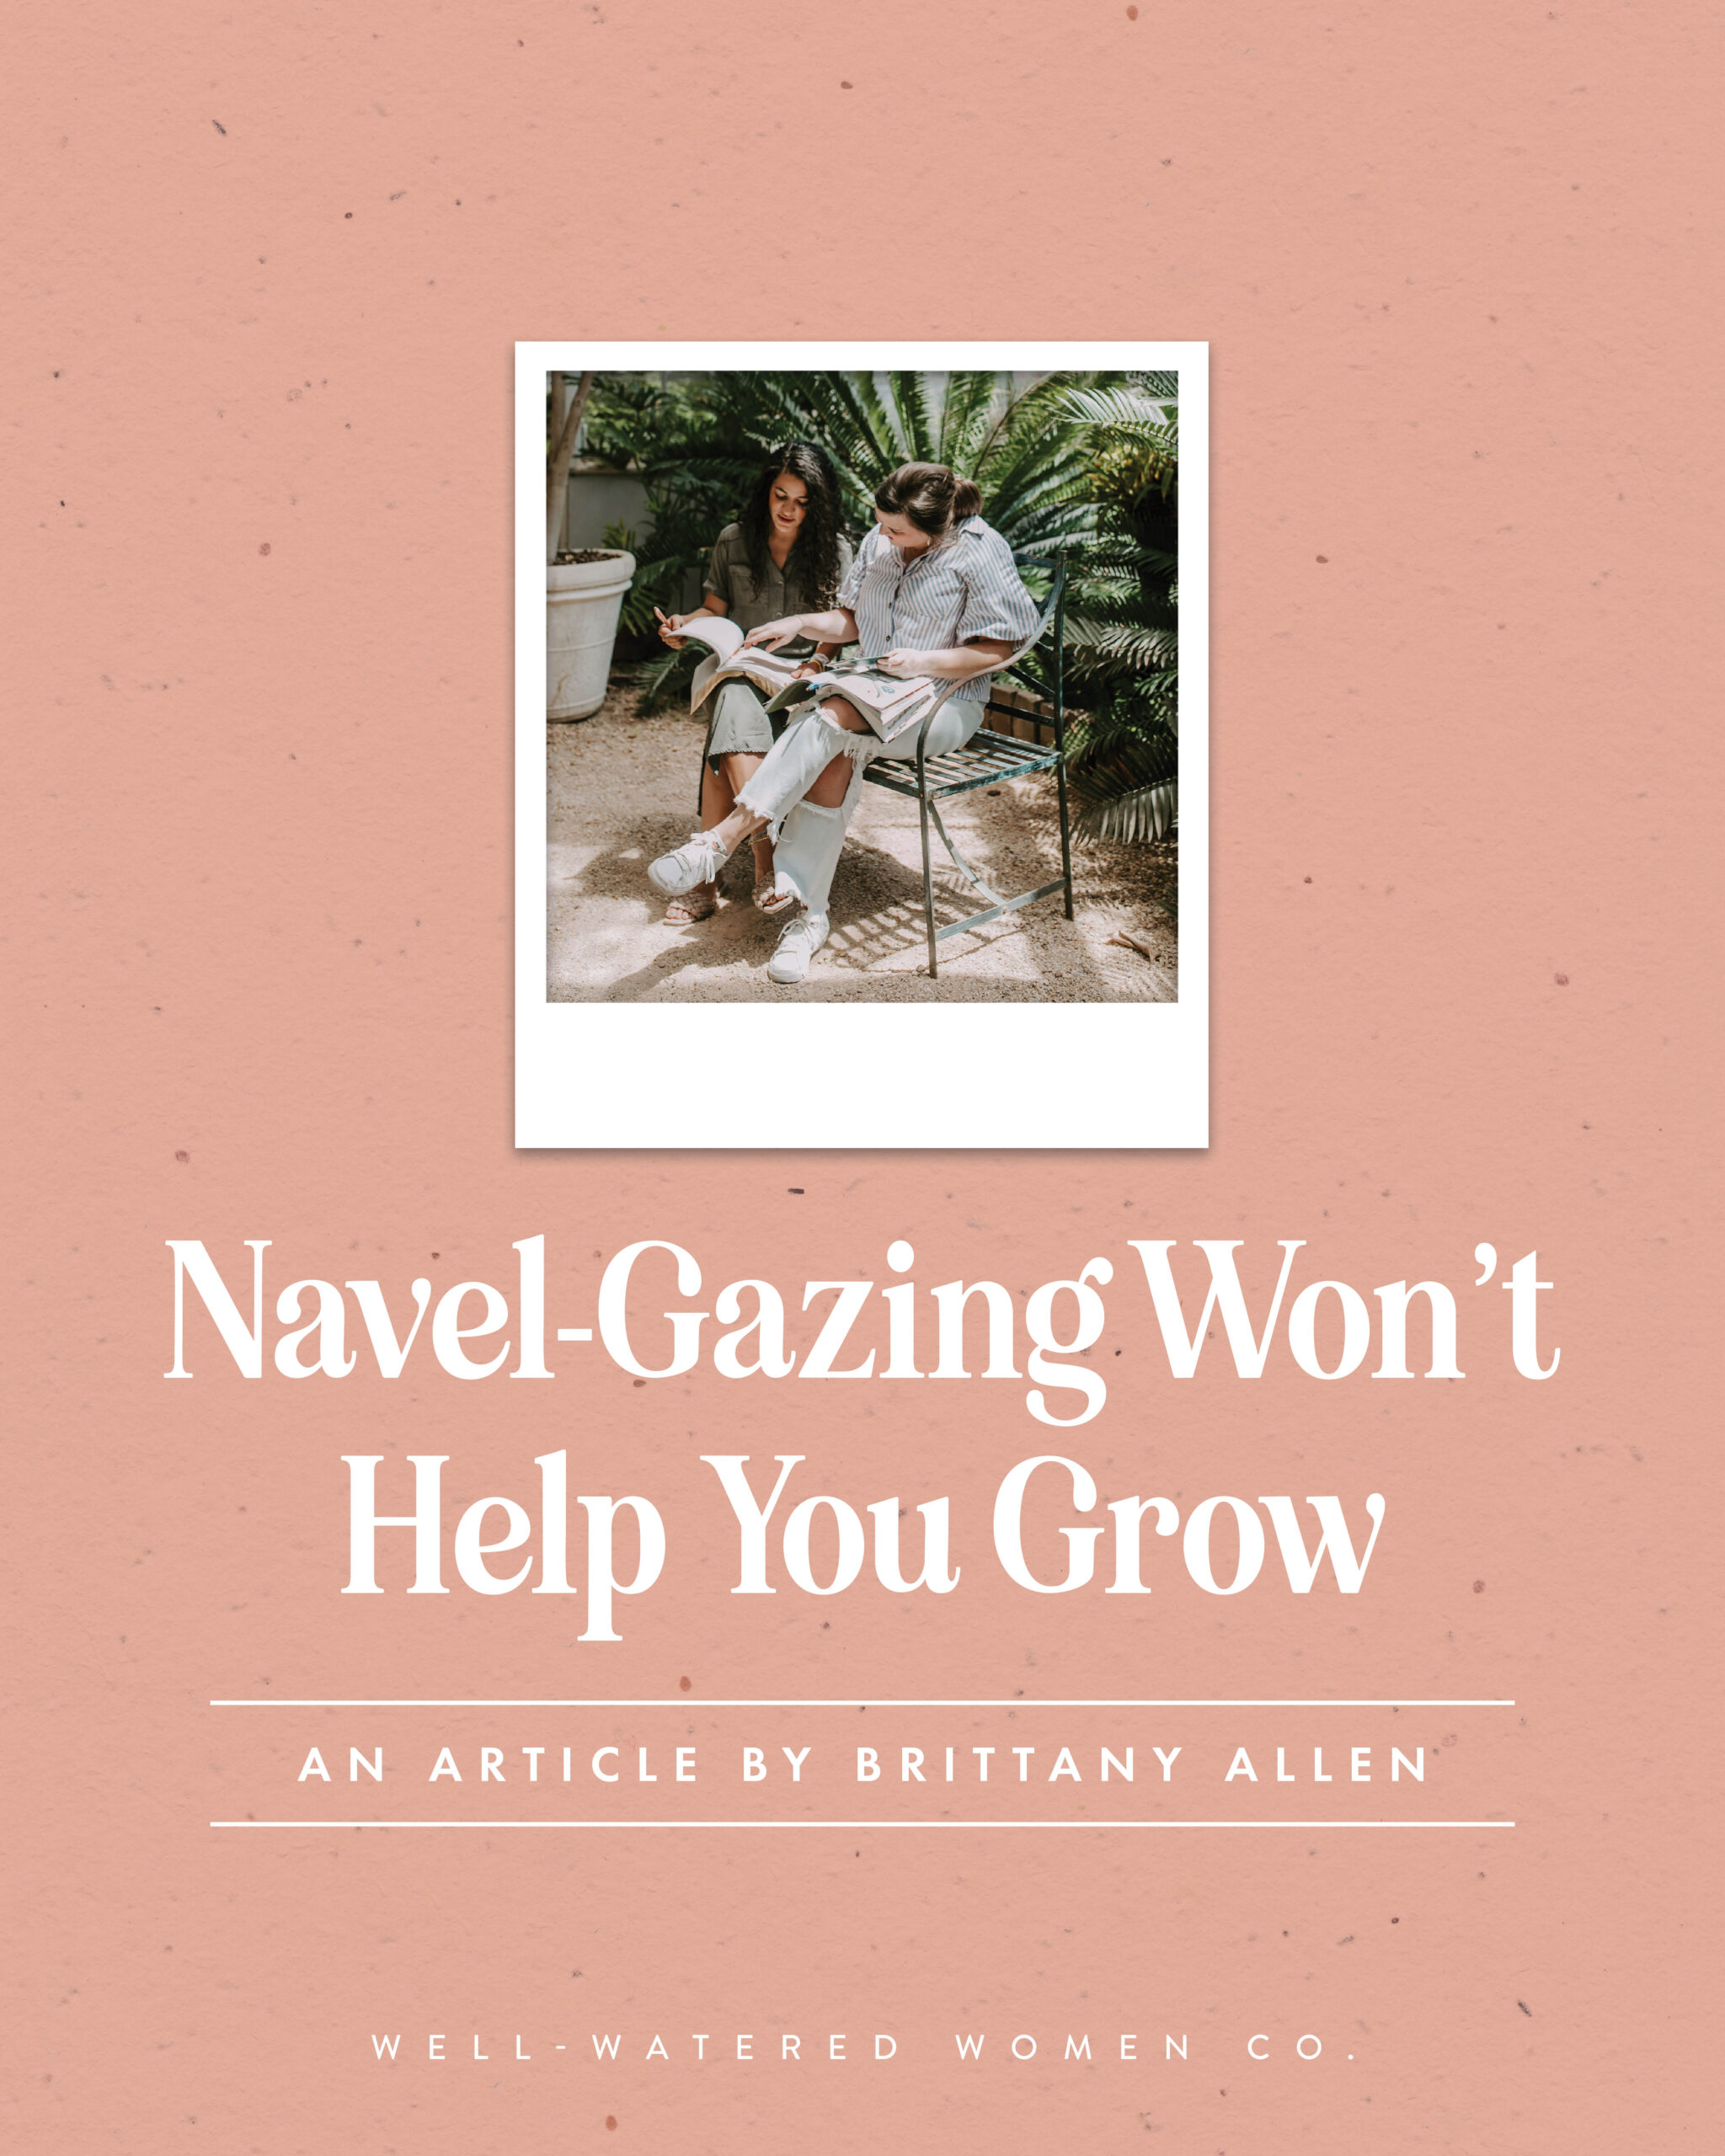 Navel-Gazing Won't Help You Grow - an article from Well-Watered Women